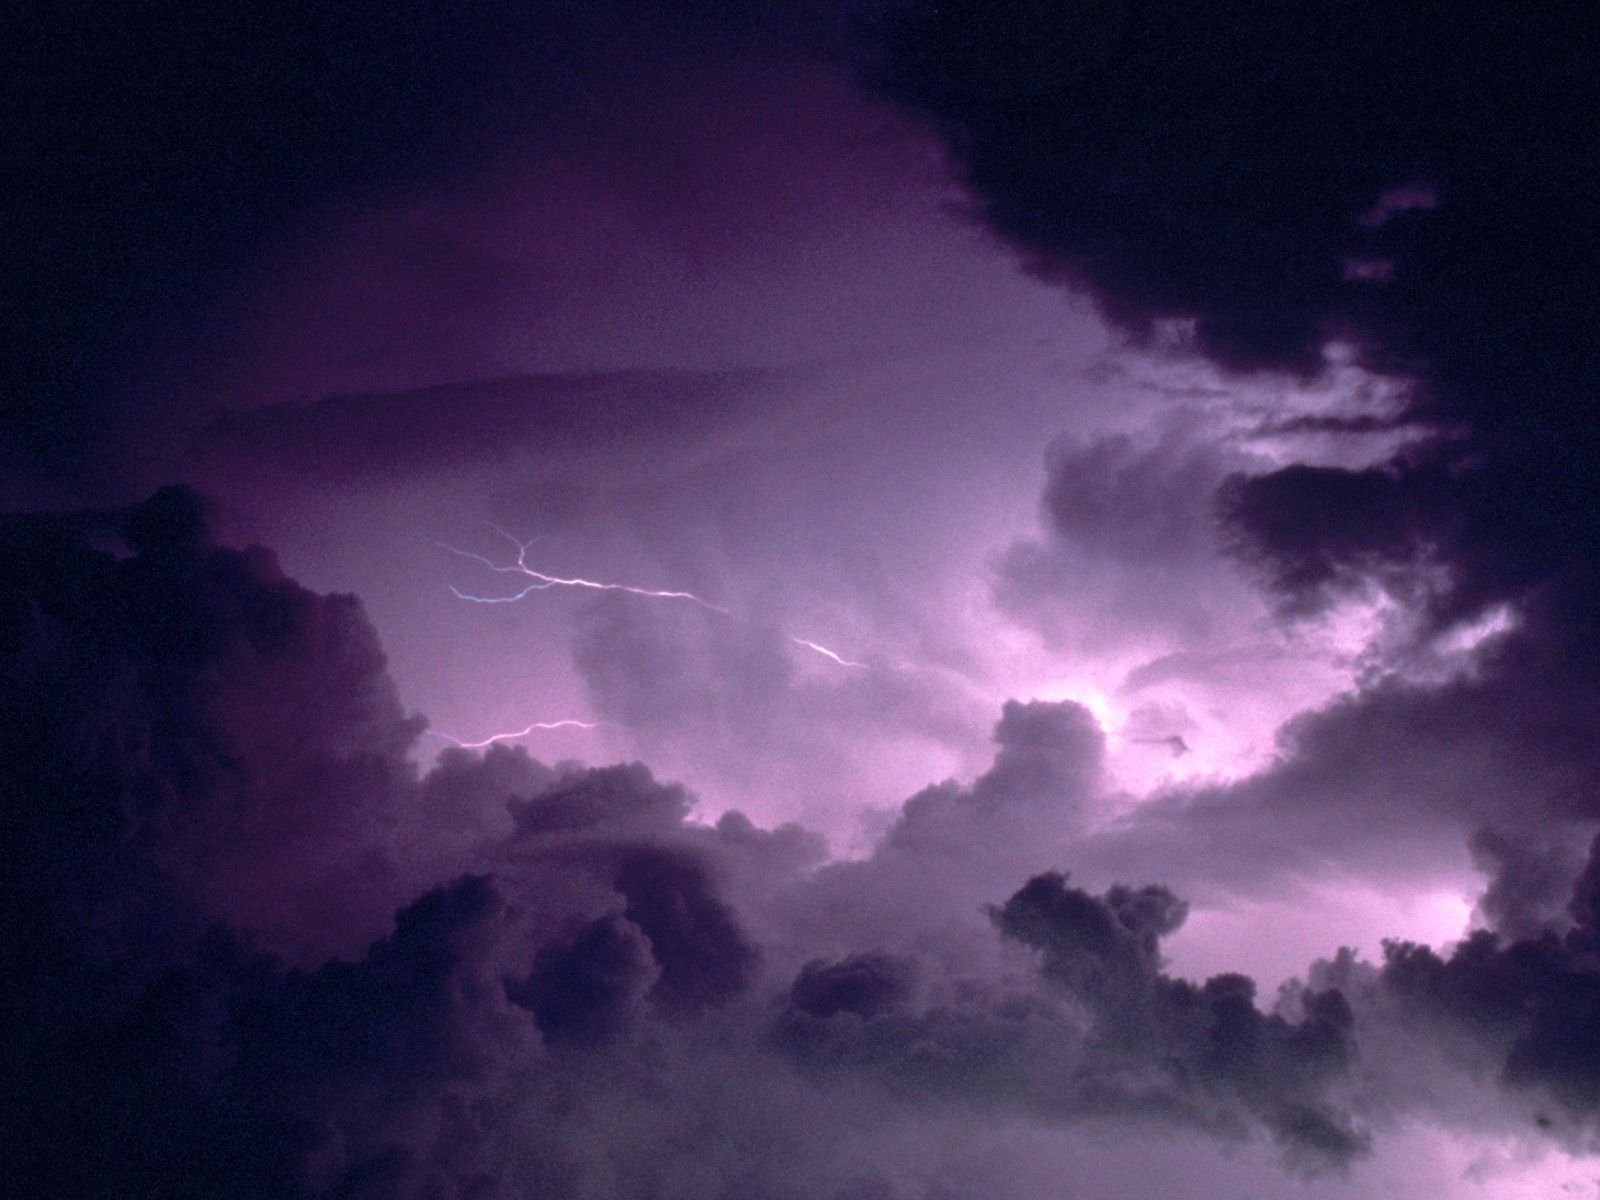 A stormy sky with purple lighting - Storm